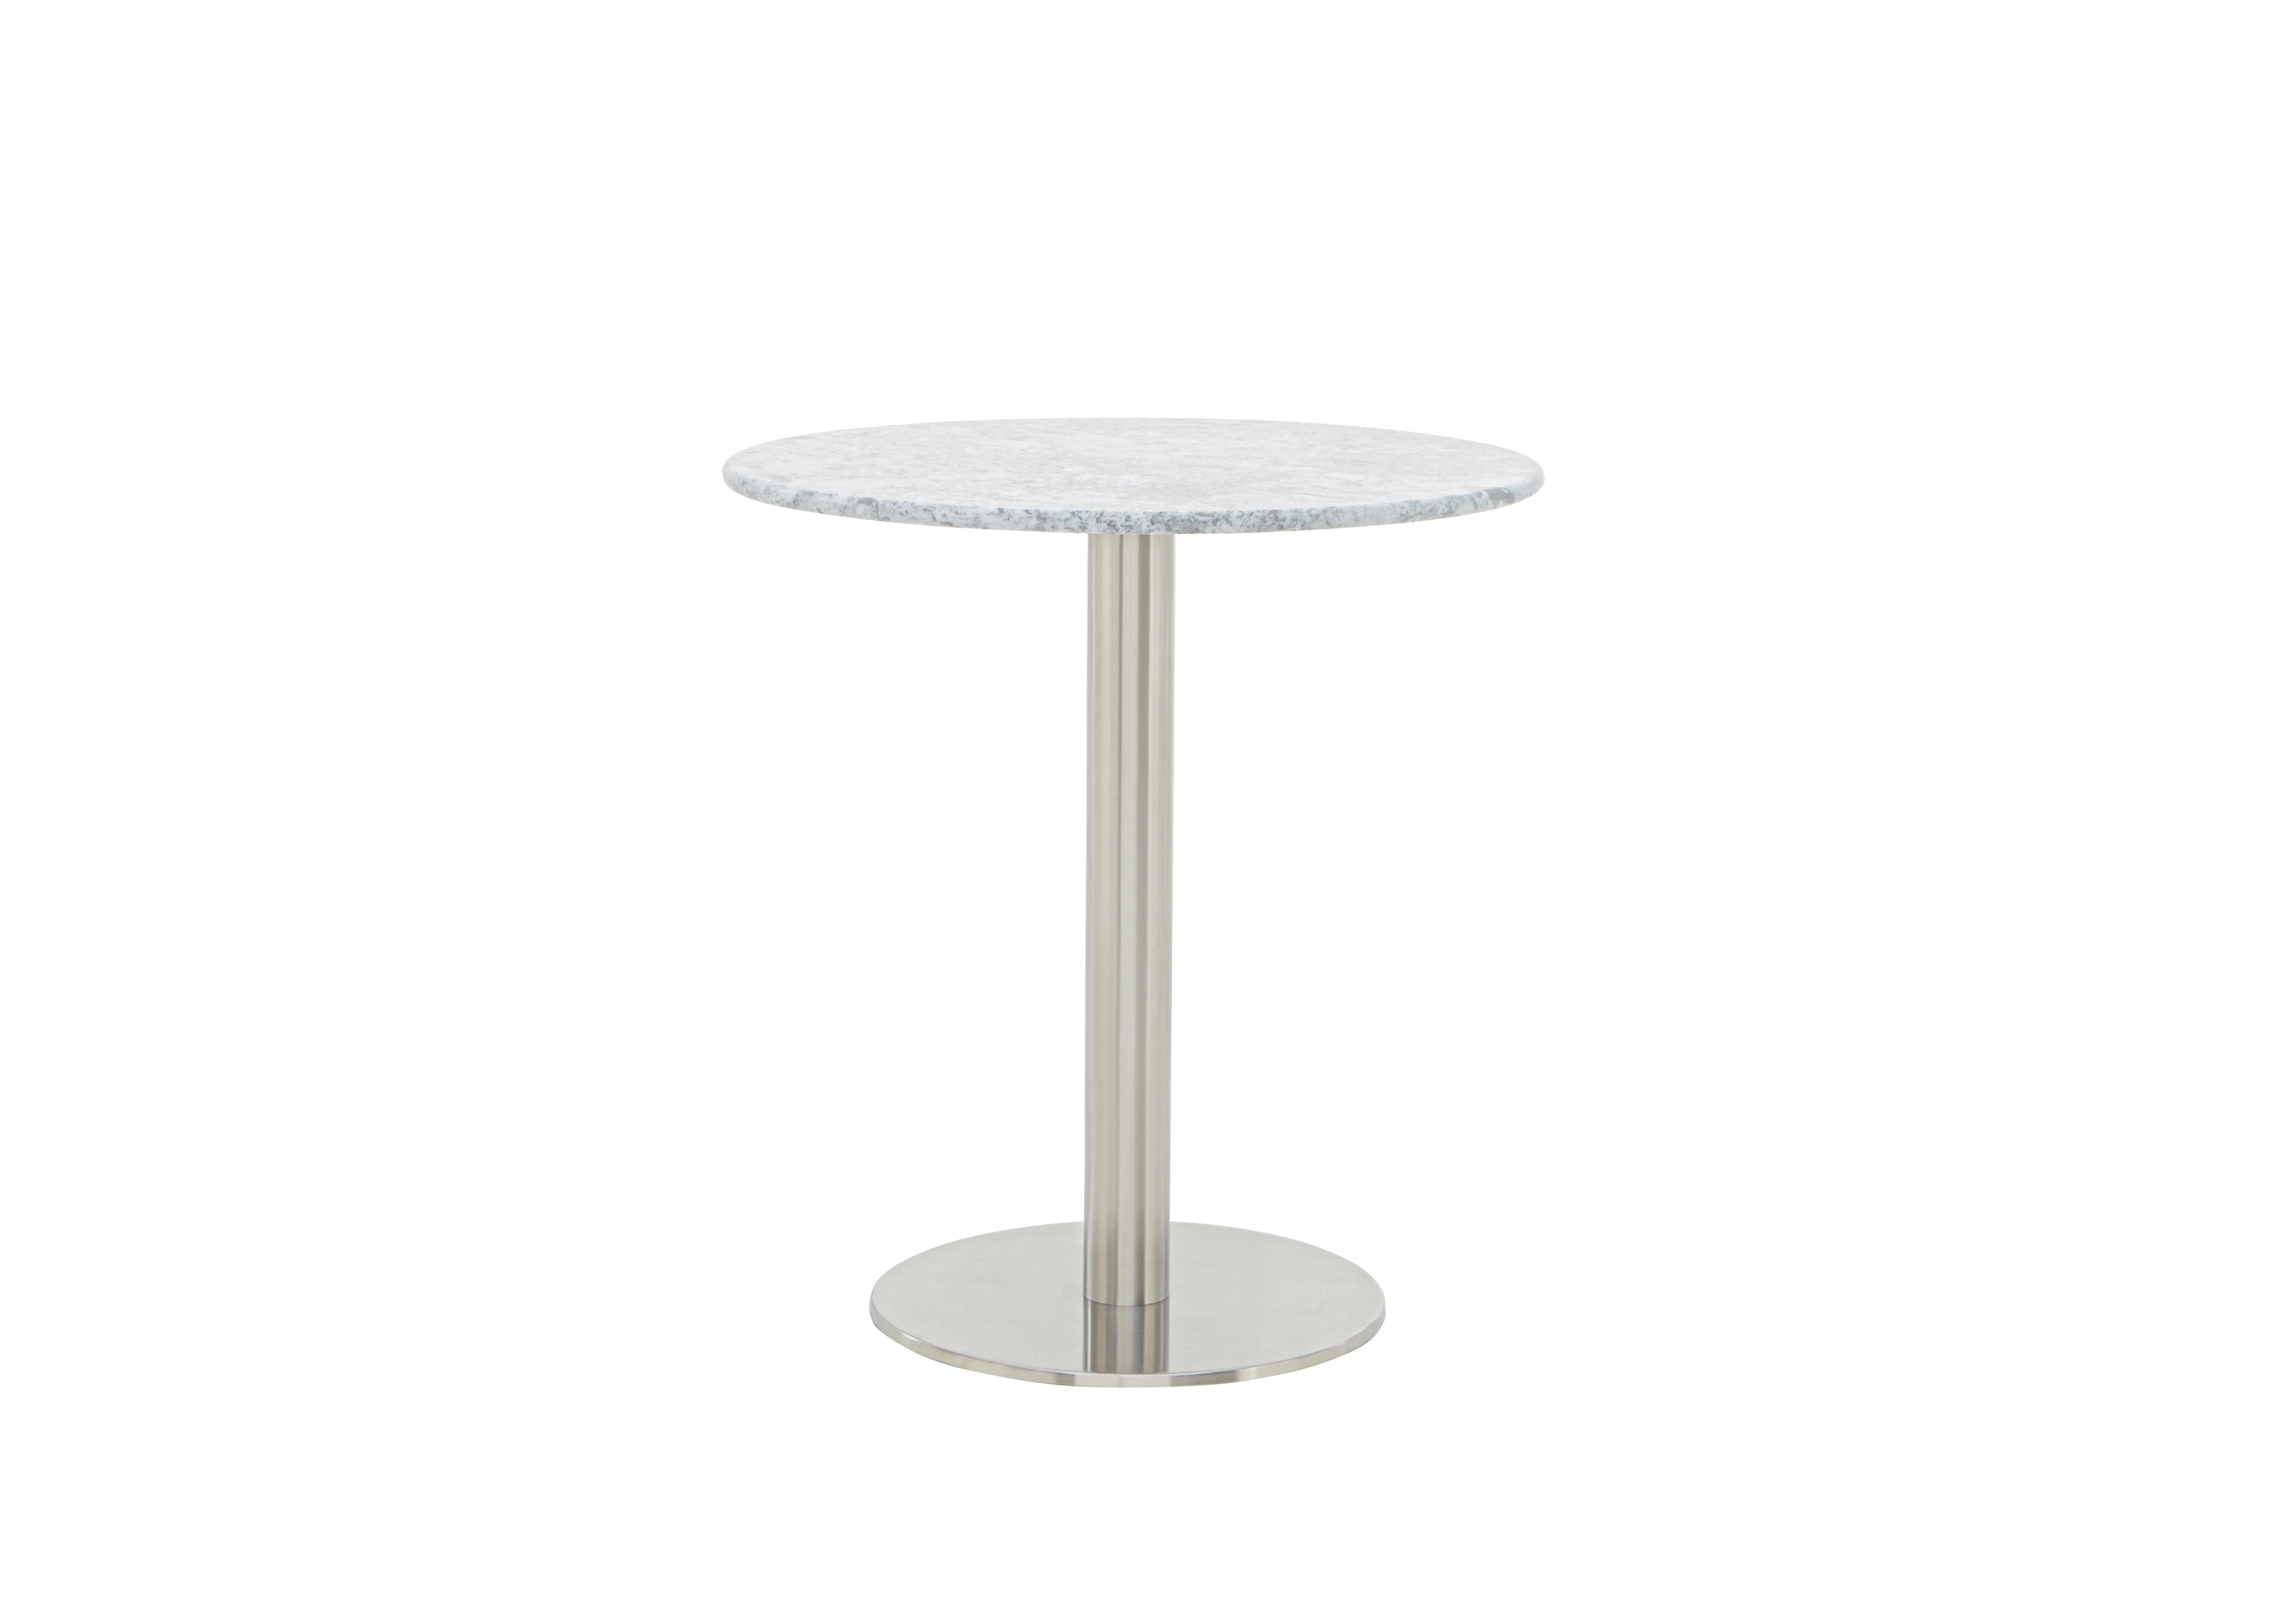 Helsinki Round Dining Table in Carrara Marble on Furniture Village